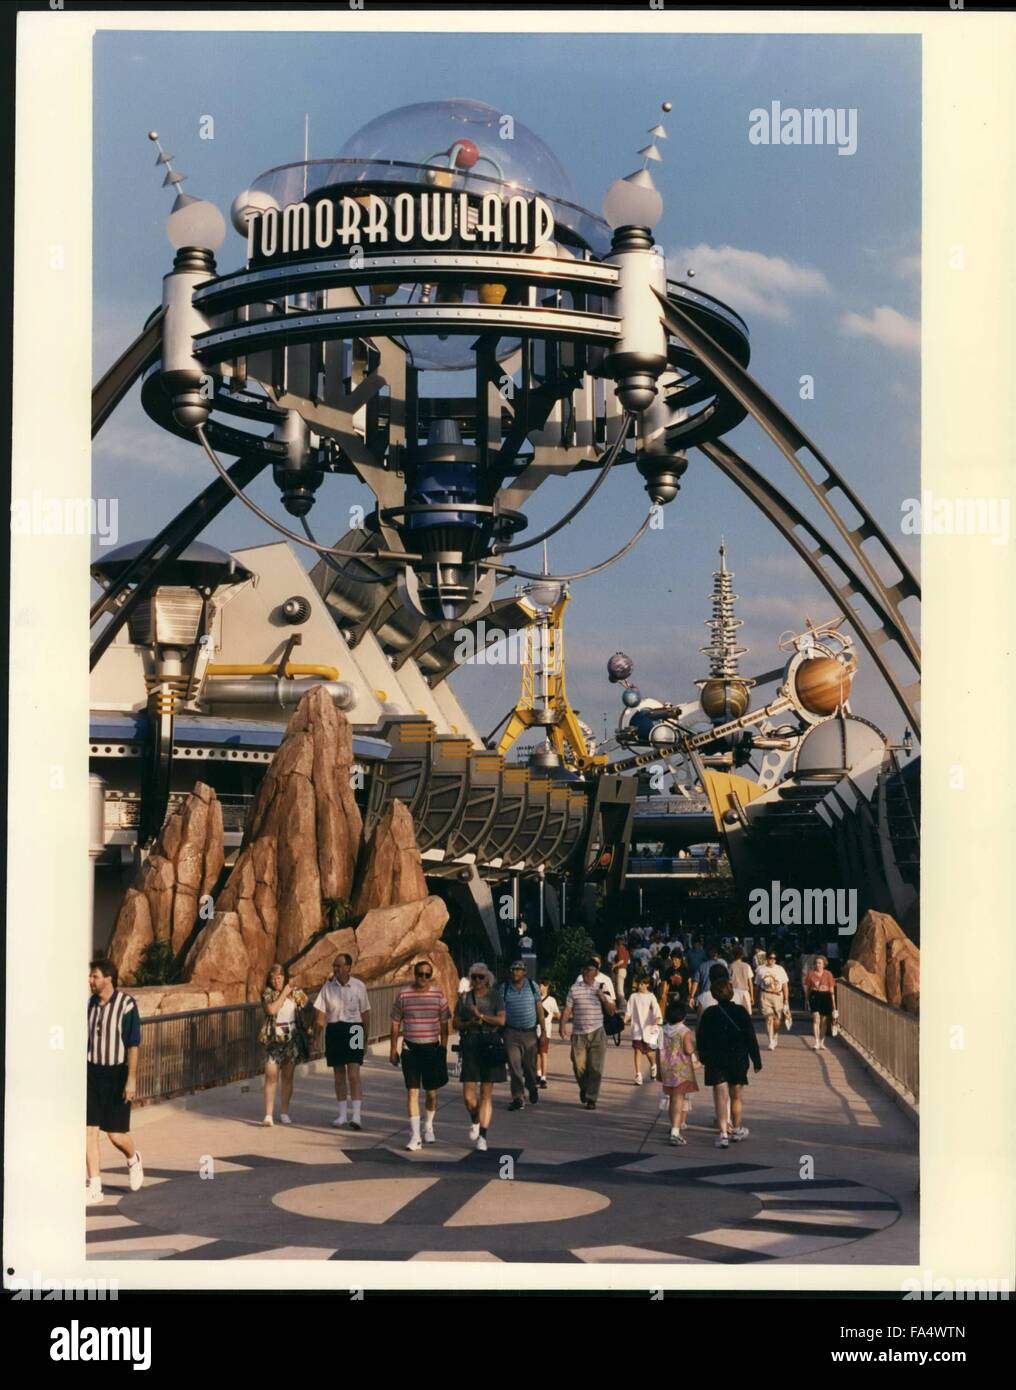 1993 - Tomorrowland to become fantasy future city: The future that never was is just around the corner in the Magic Kingdom at the Walt Disney World Resort. A brand new Tommorowland welcomes visitors with a future town friendly neighborhood atmosphere. Like the other lands in the Magic Kingdom. New attractions and shows provide entertainment to park guests. © Keystone Pictures USA/ZUMAPRESS.com/Alamy Live News Stock Photo